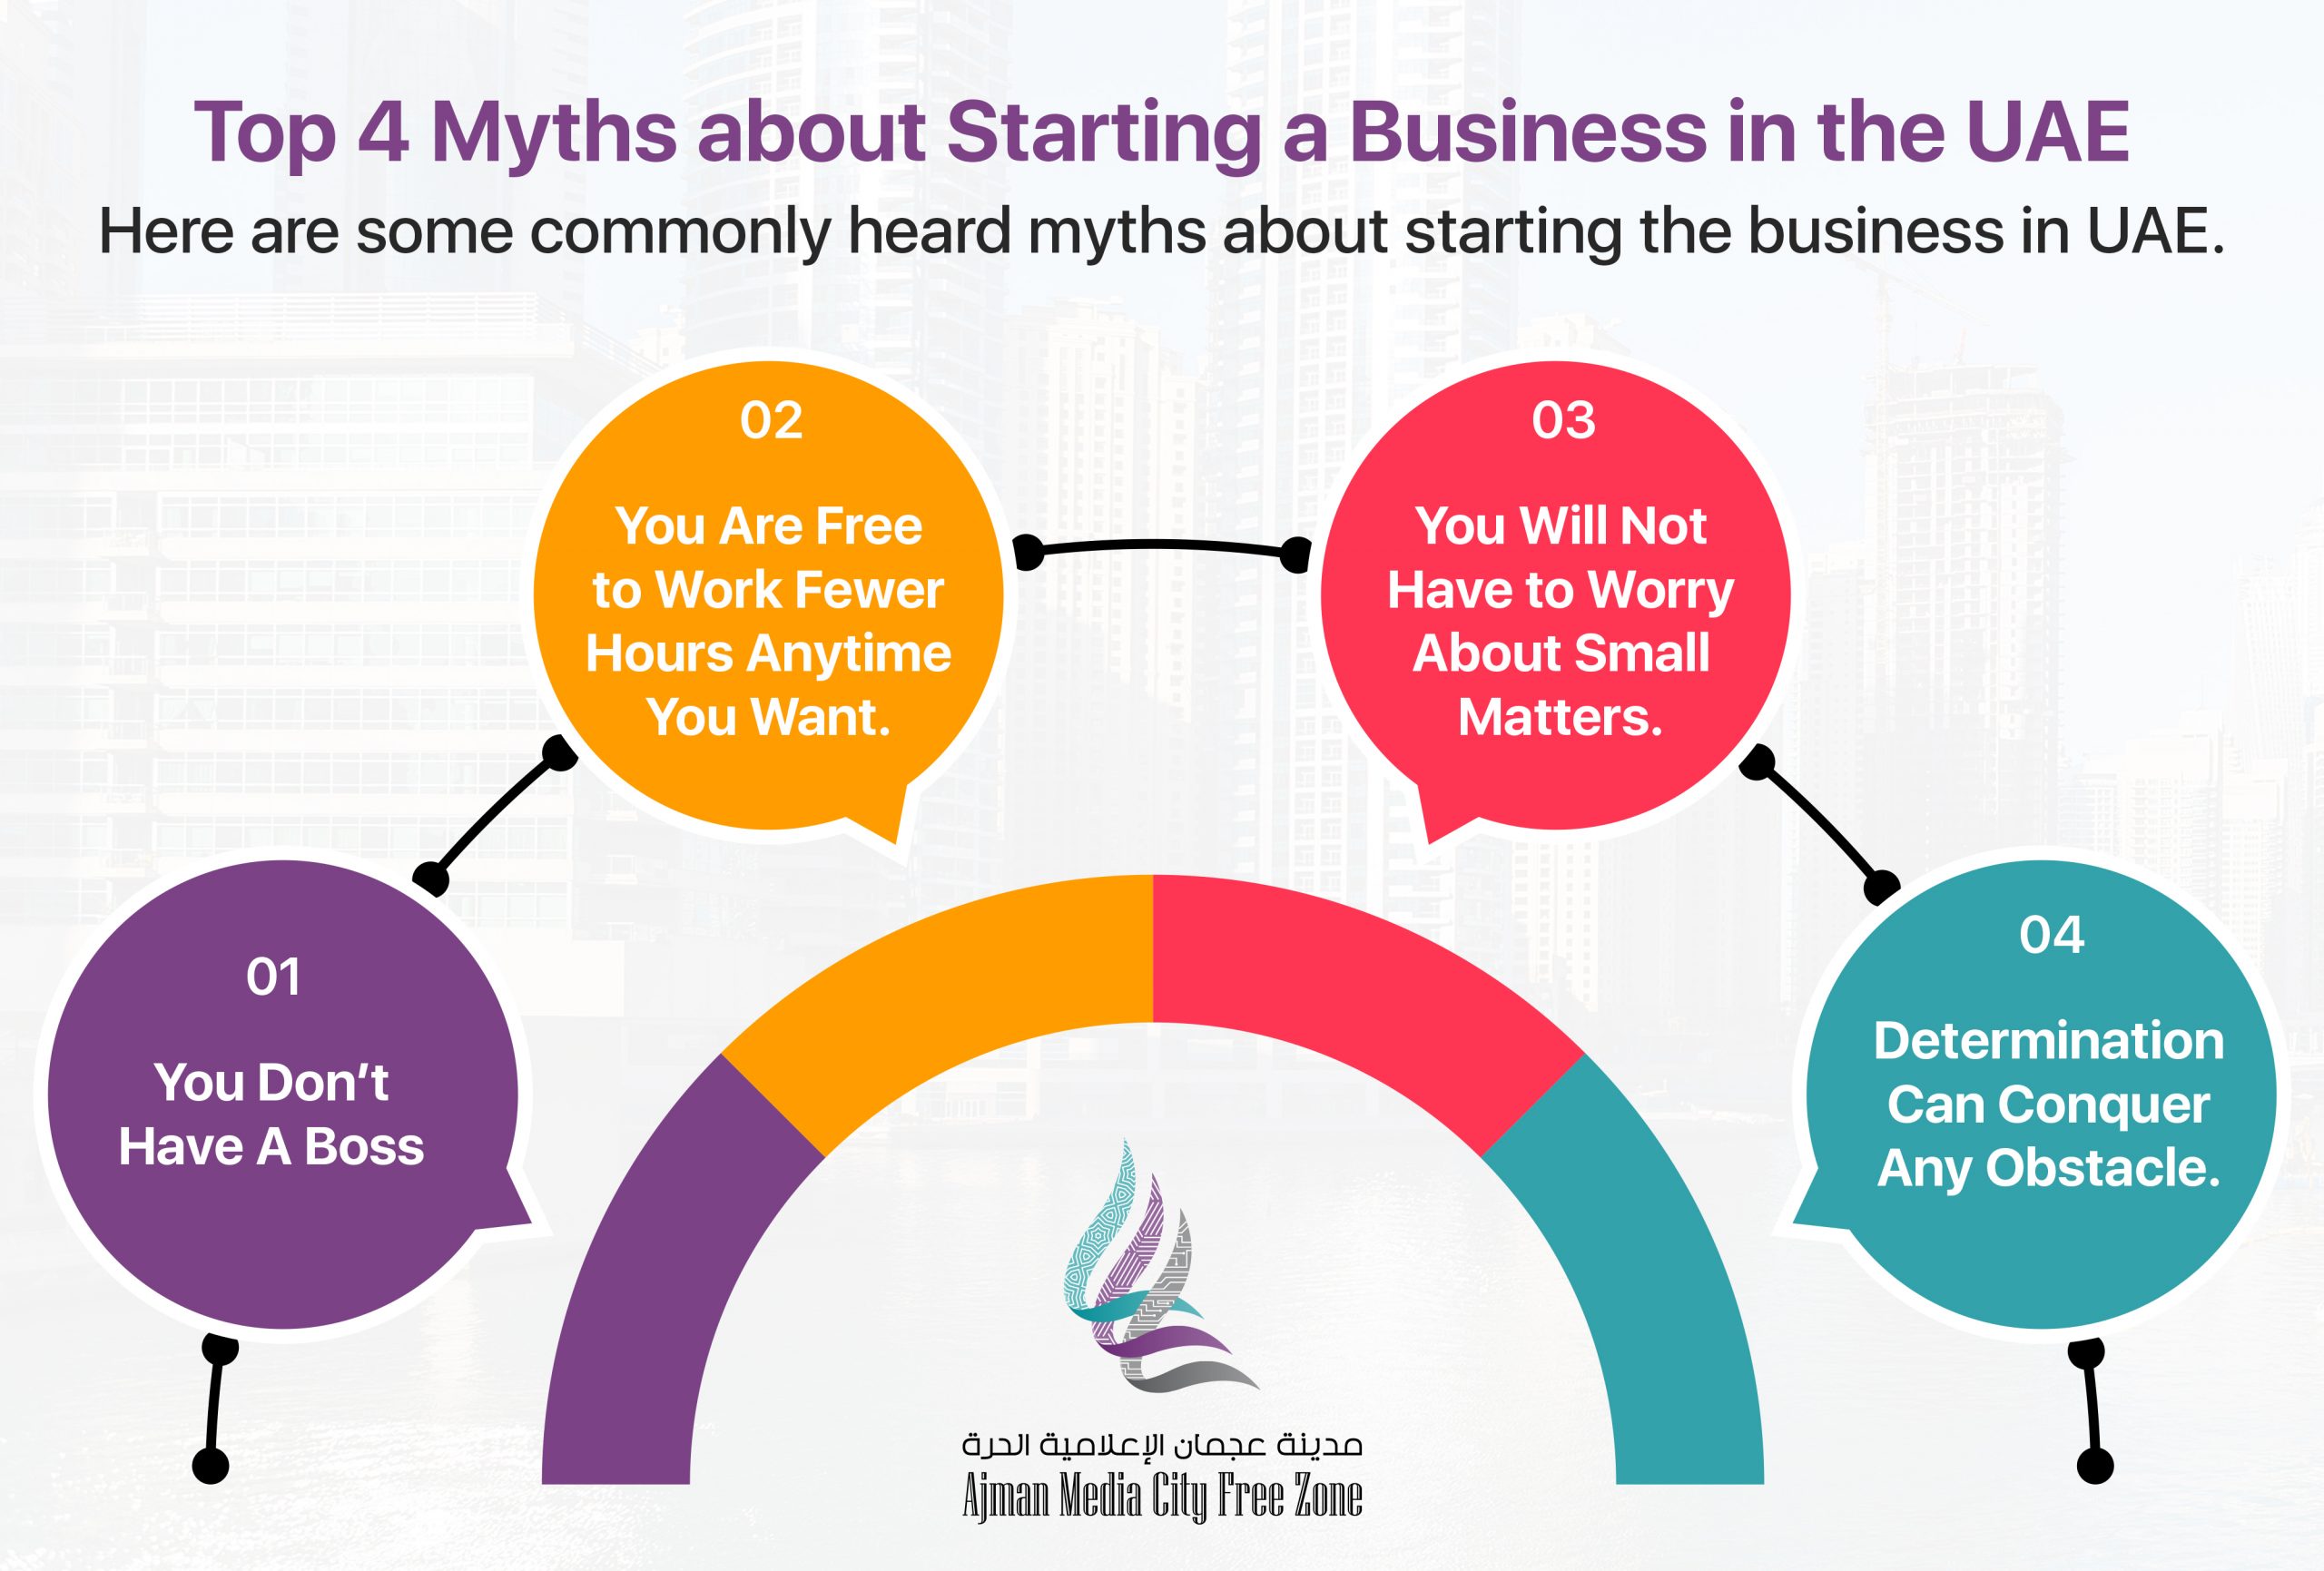 Top 4 Myths about Starting a Business in the UAE